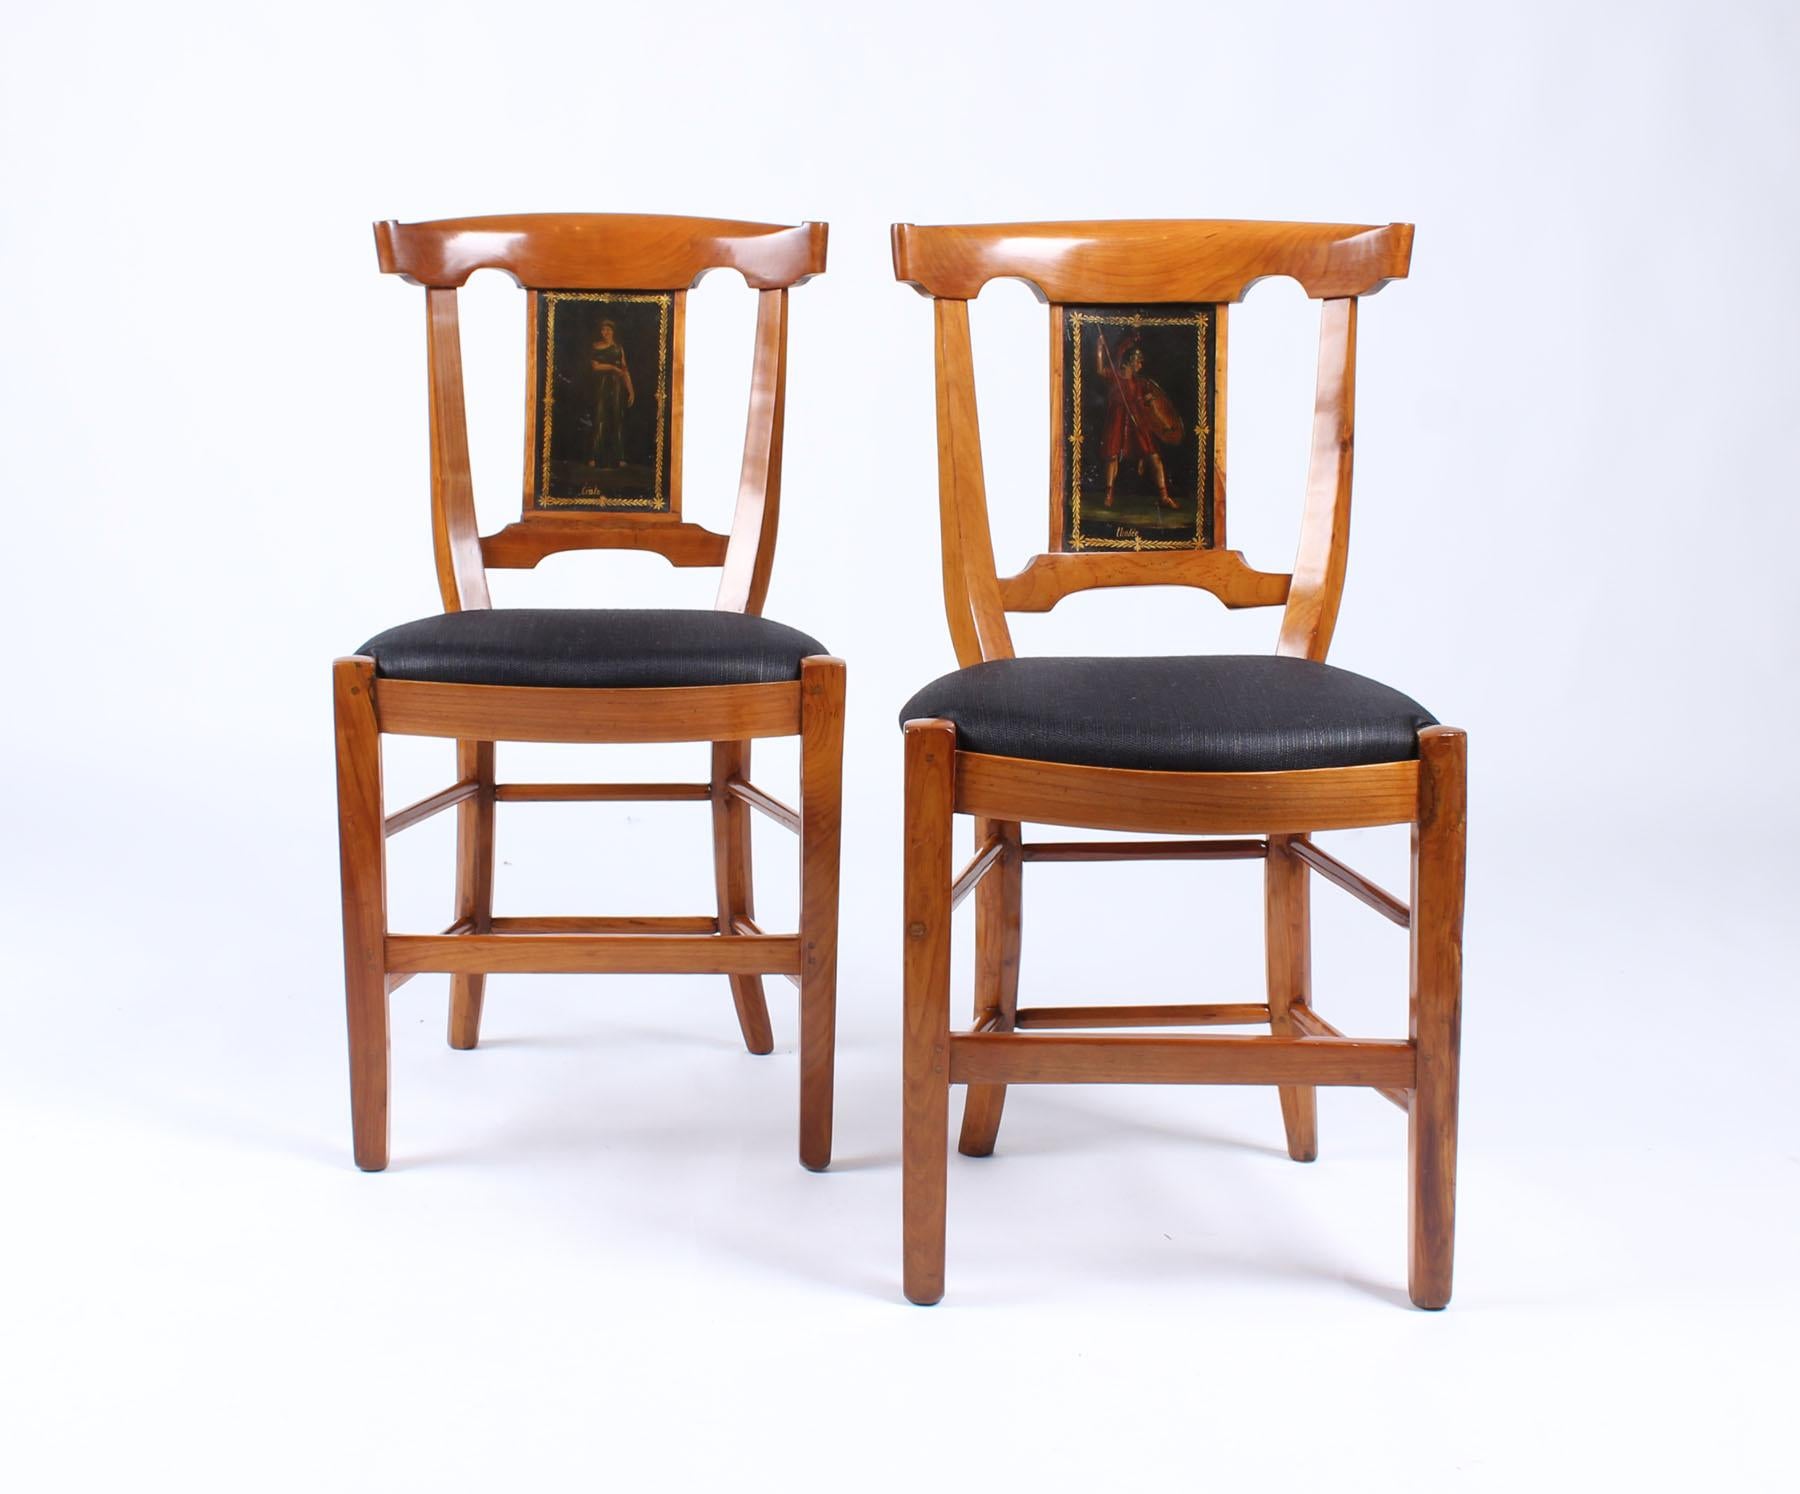 Set of Four 18th Century Chairs, France, Cherry, Painted, Directoire, circa 1800 For Sale 2